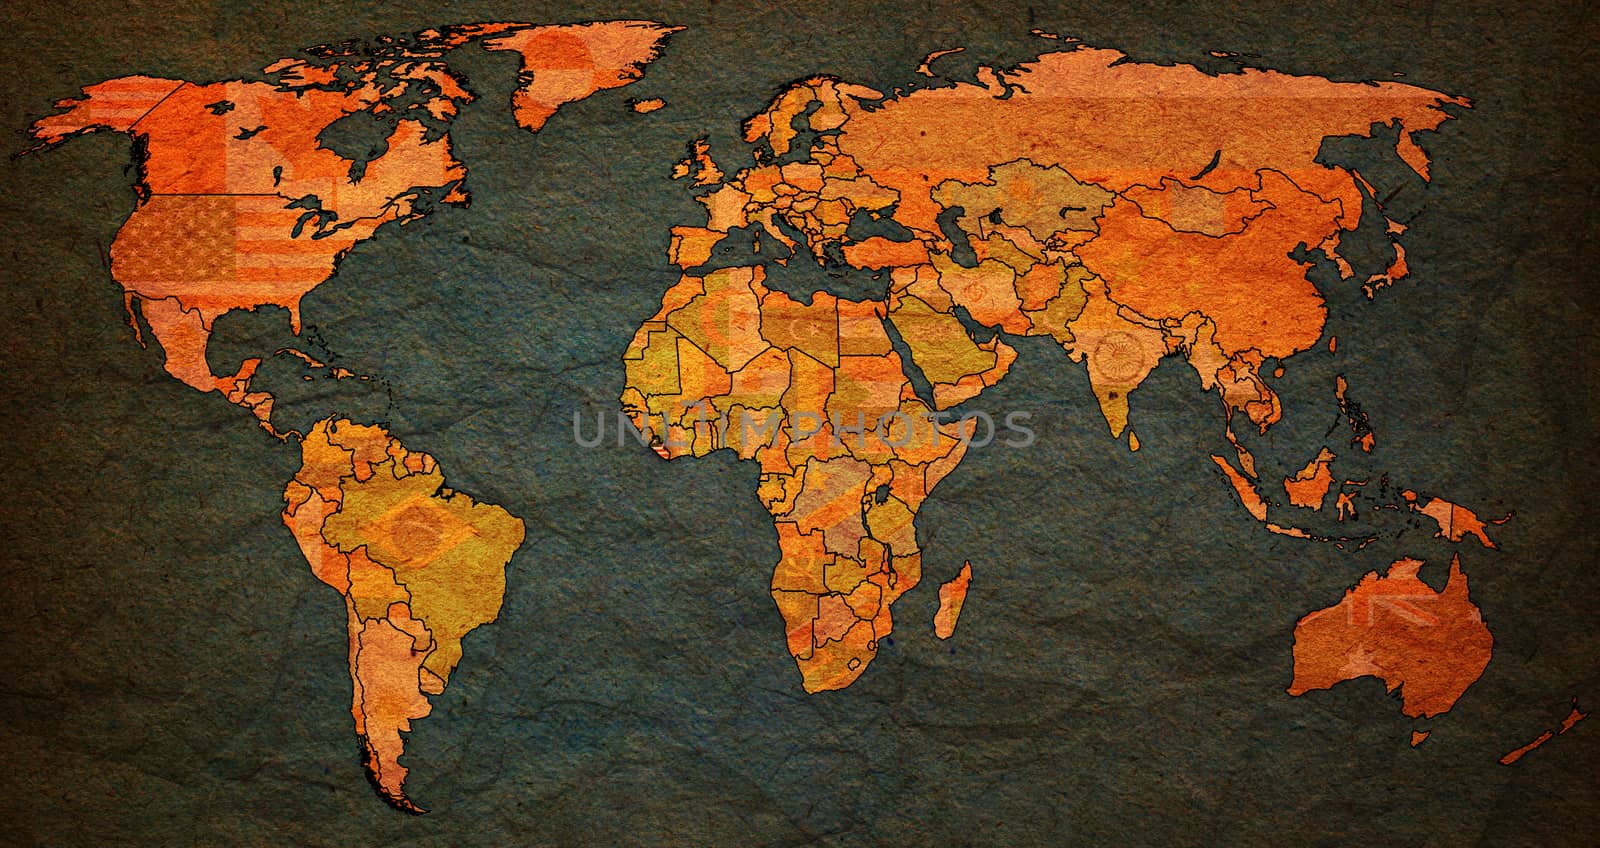 liberia territory on actual world map by michal812